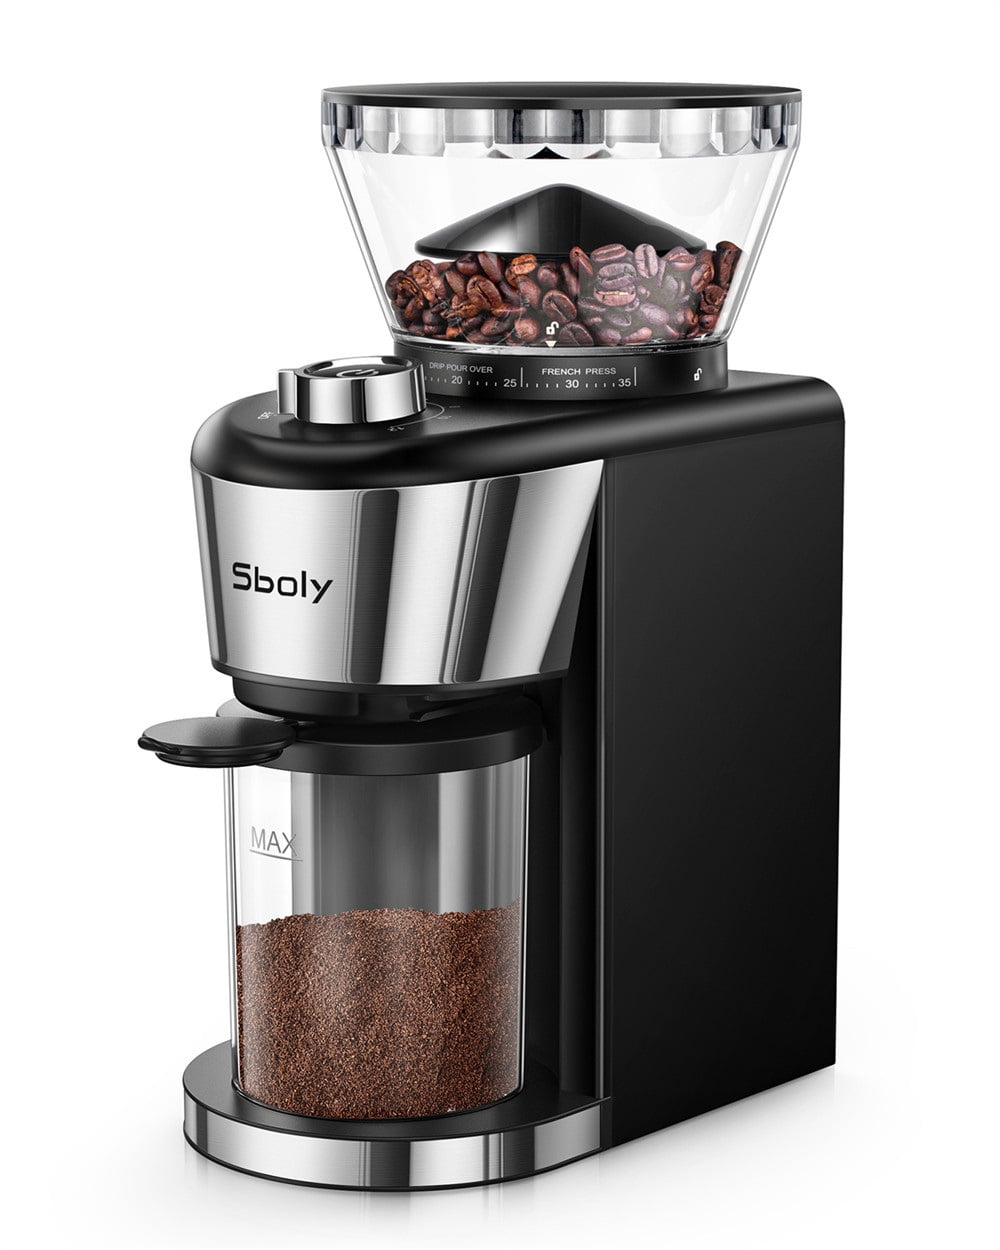 Electric Burr Coffee Grinder Coffee Bean Grinder with 19 Grind Settings Stainless Steel Blade Adjustable Burr Mill Coffee Grinder 2-12 Cup for Espresso Drip Coffee French Press Percolator Coffee 